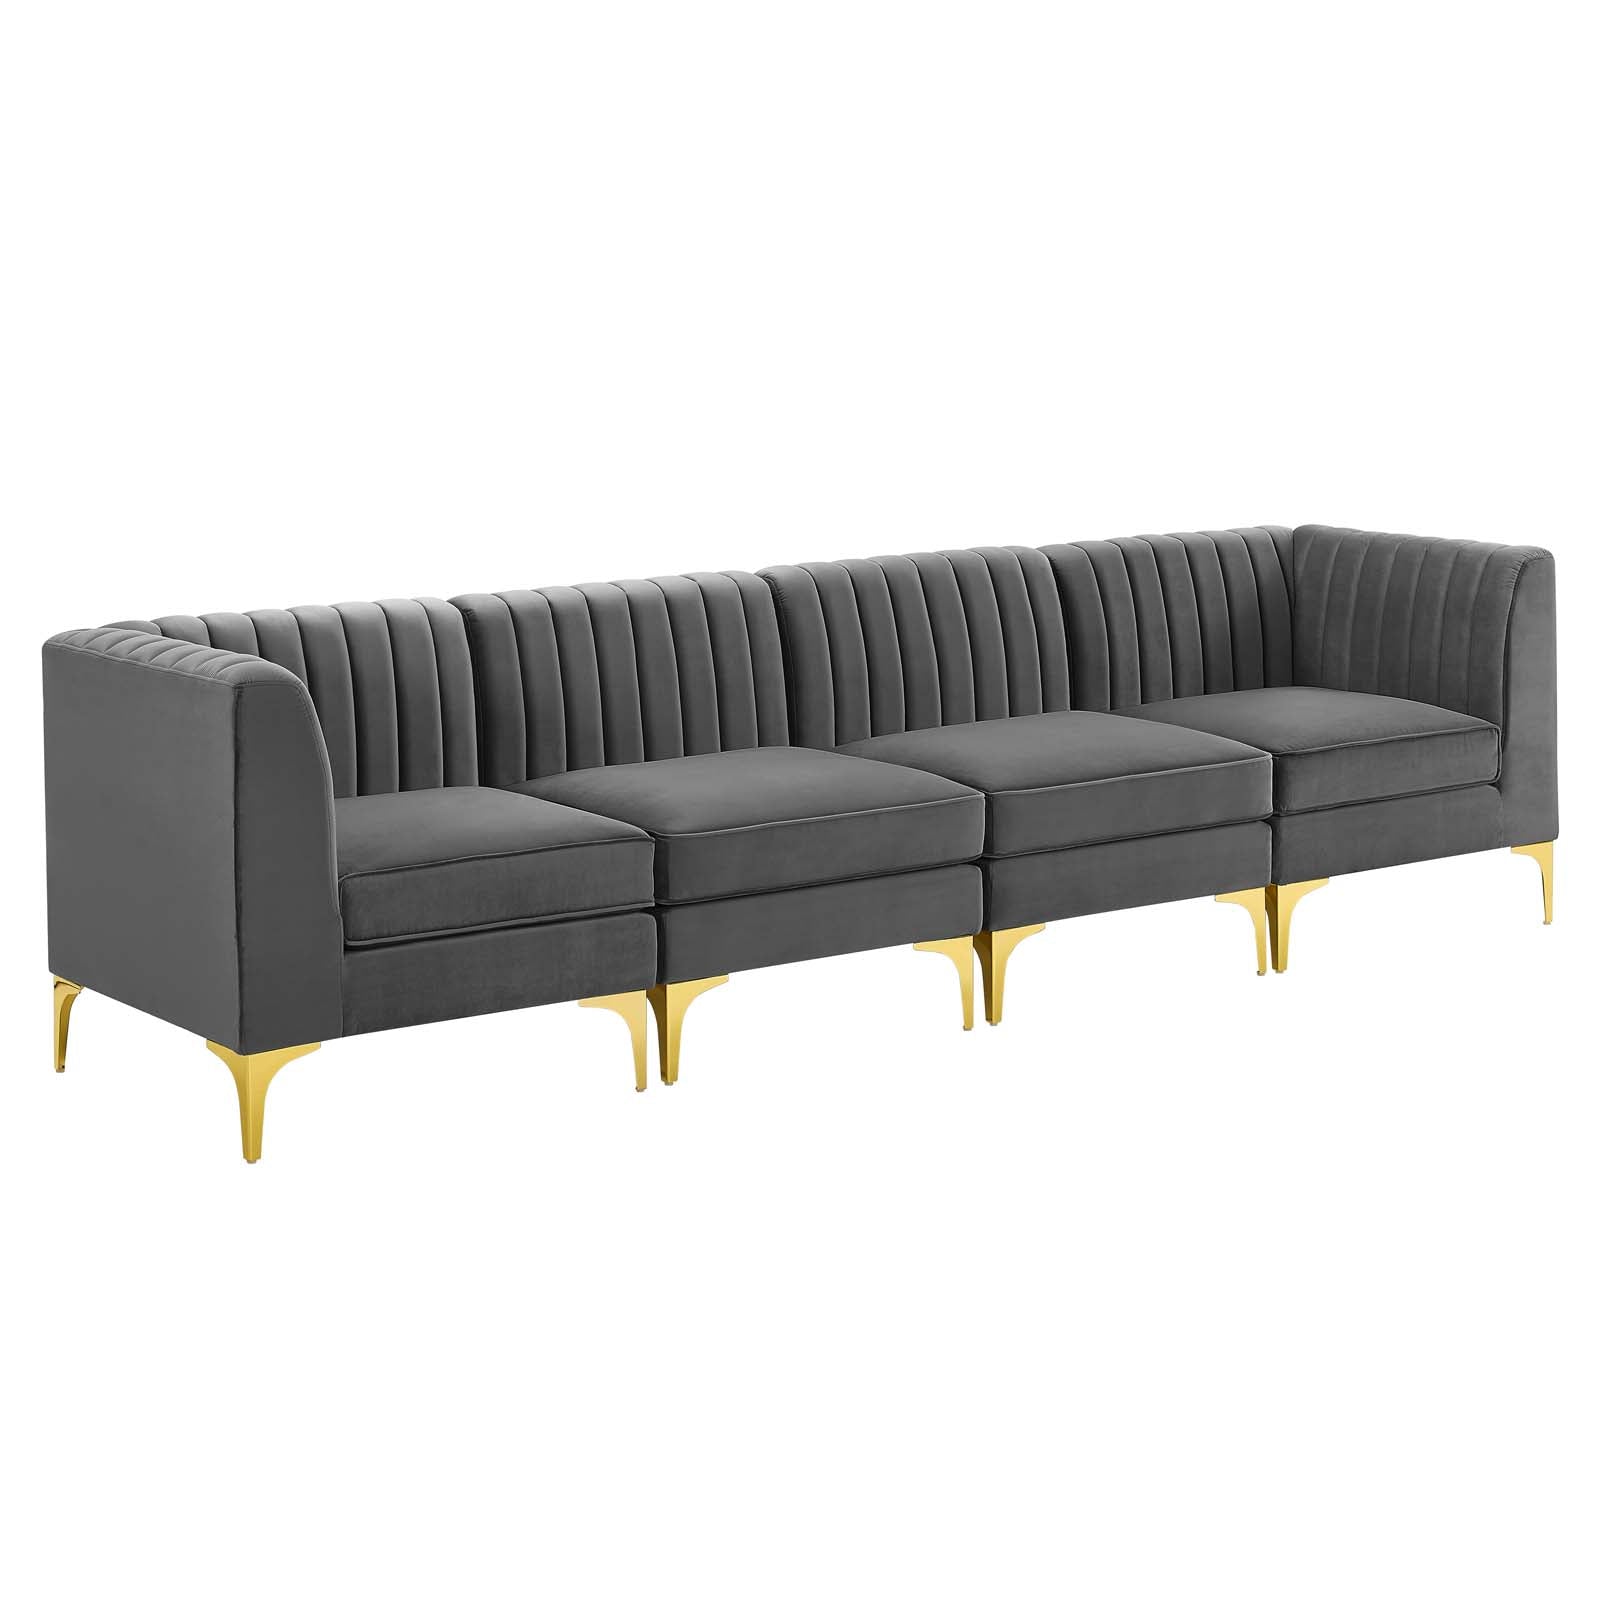 Modway Sofas & Couches - Triumph Channel Tufted Performance Velvet 4-Seater Sofa Gray